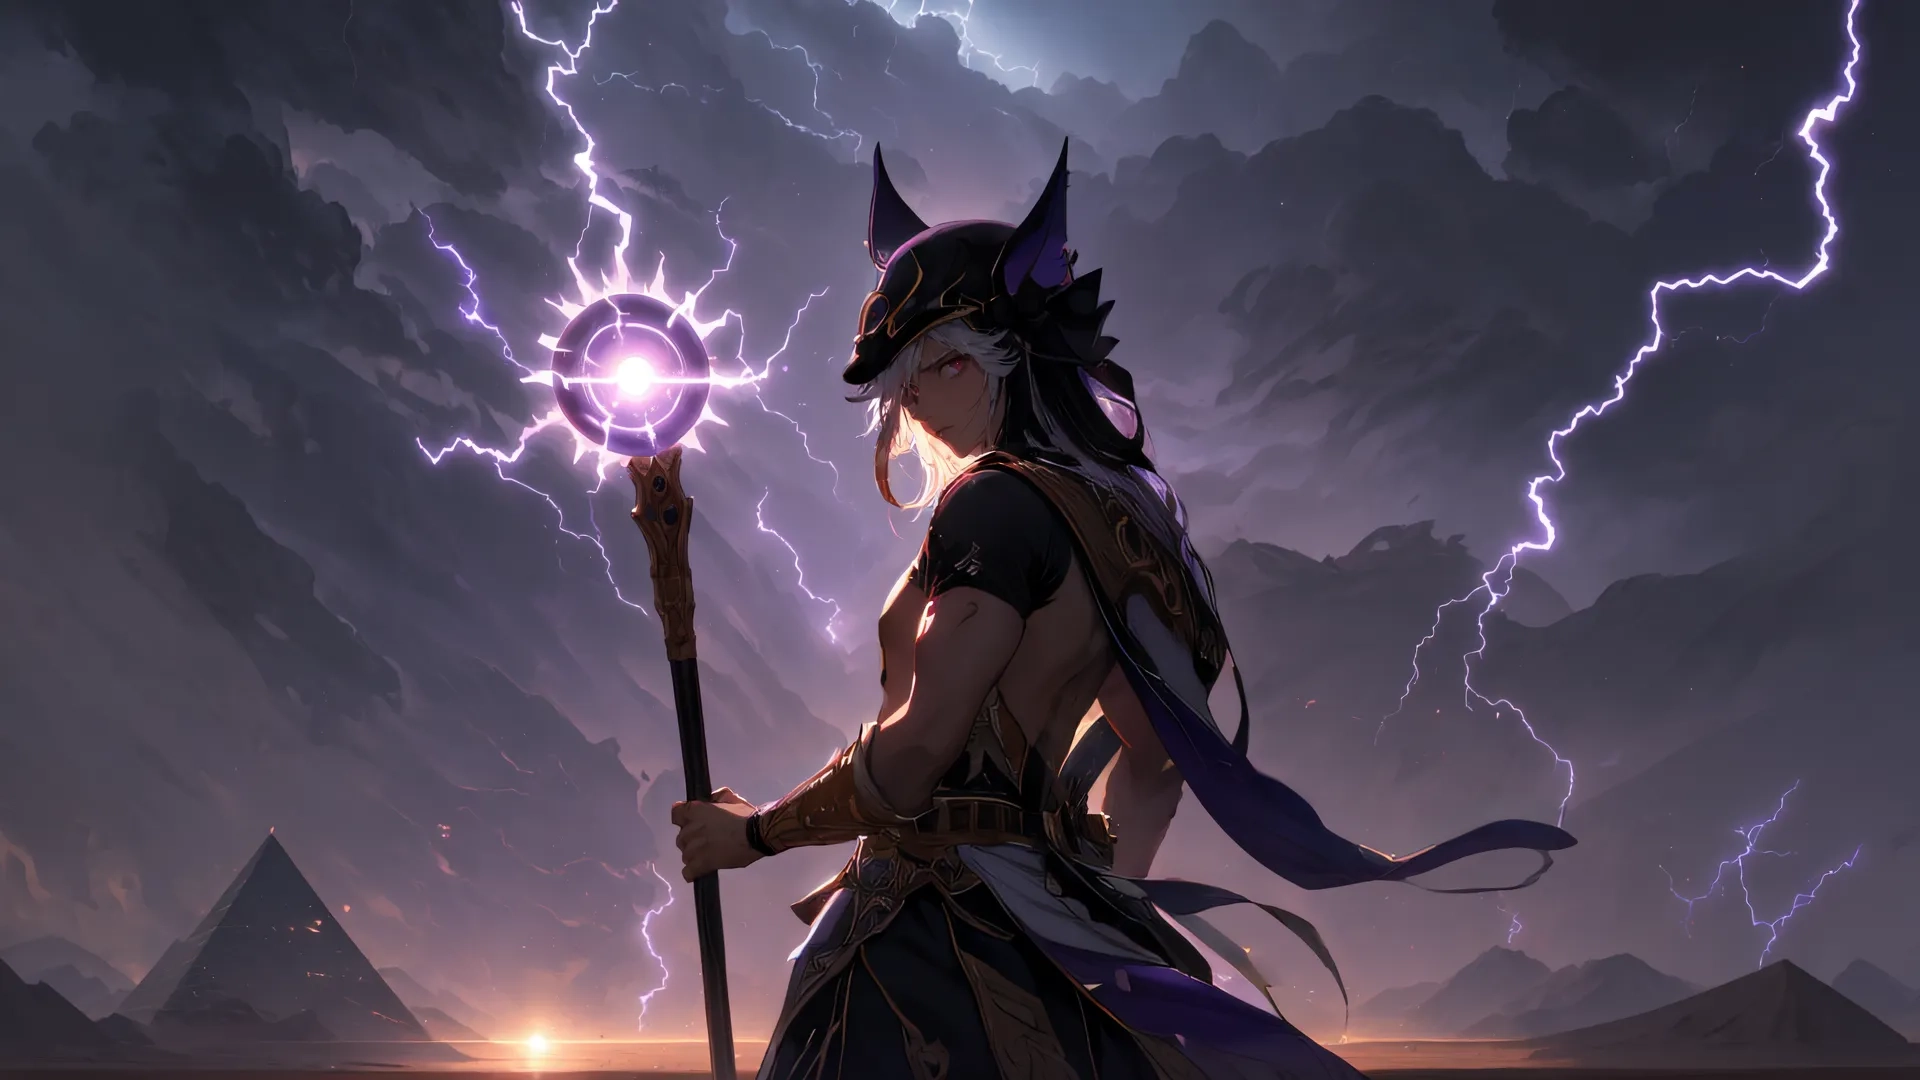 a young girl with a sword and a lightning in her hand is seen from behind by rocks while an arcoonr stands outdoors and lights shines below
